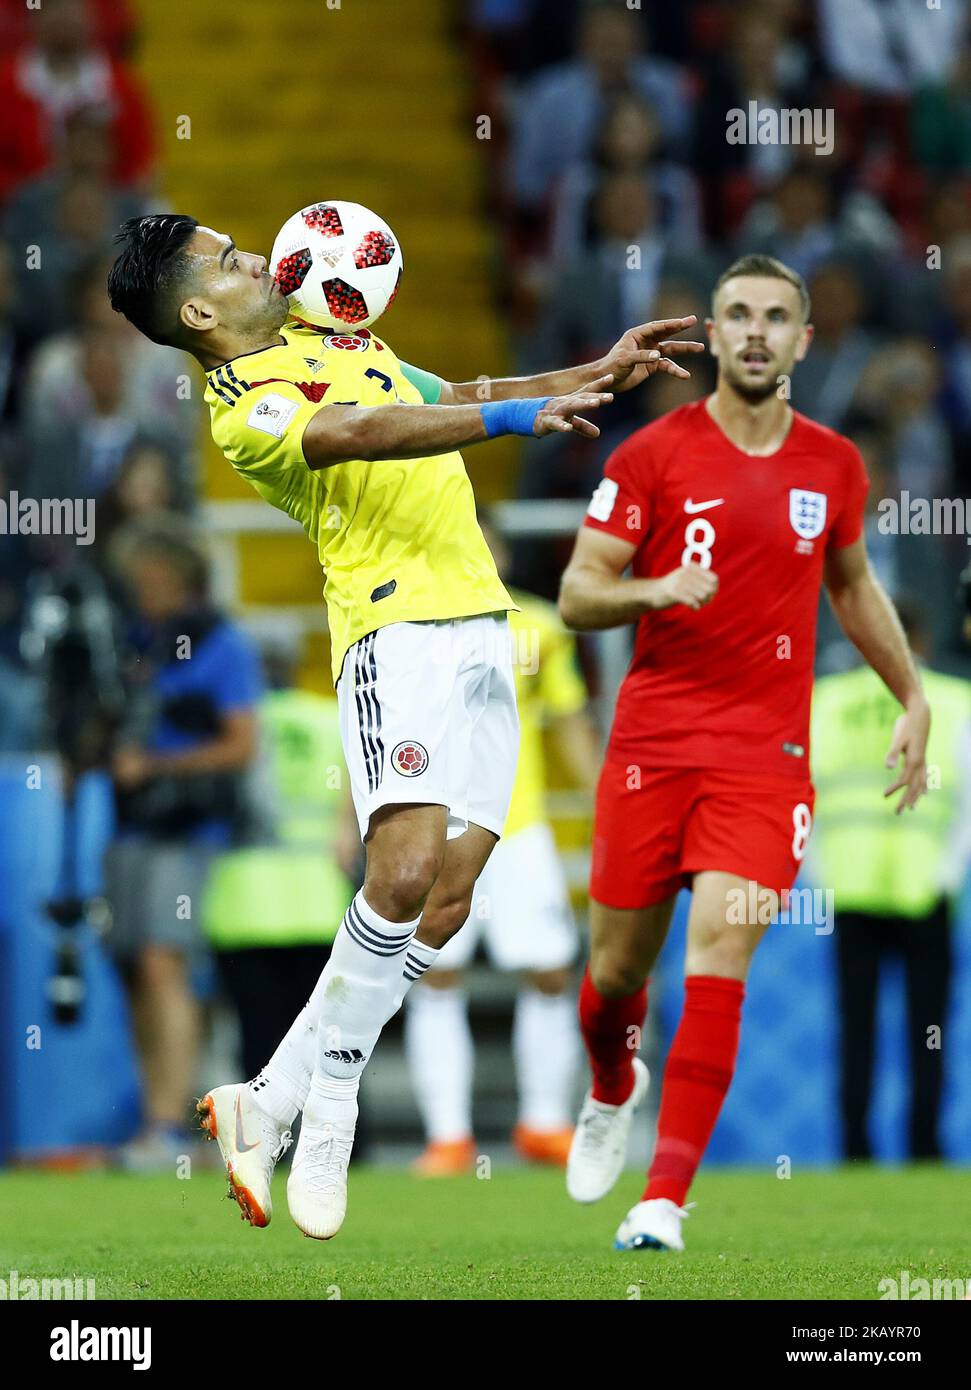 Round of 16 England v Colombia - FIFA World Cup Russia 2018 Radamel Falcao (Colombia) and Jordan Henderson (England) at Spartak Stadium in Moscow, Russia on July 3, 2018. (Photo by Matteo Ciambelli/NurPhoto)  Stock Photo